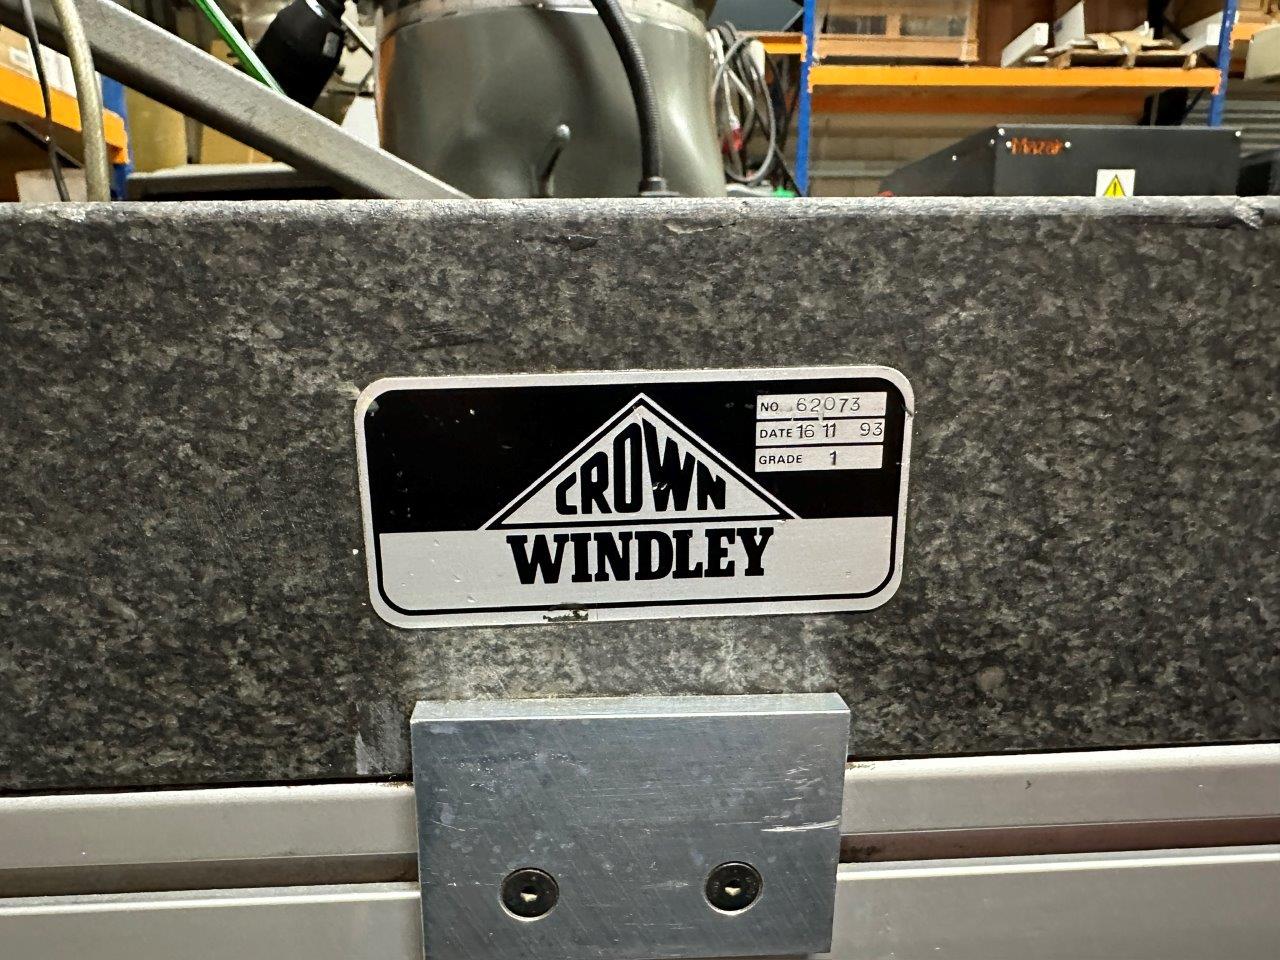 Surface Plates/Crown Windley Granite Surface Plate on stand (4406)